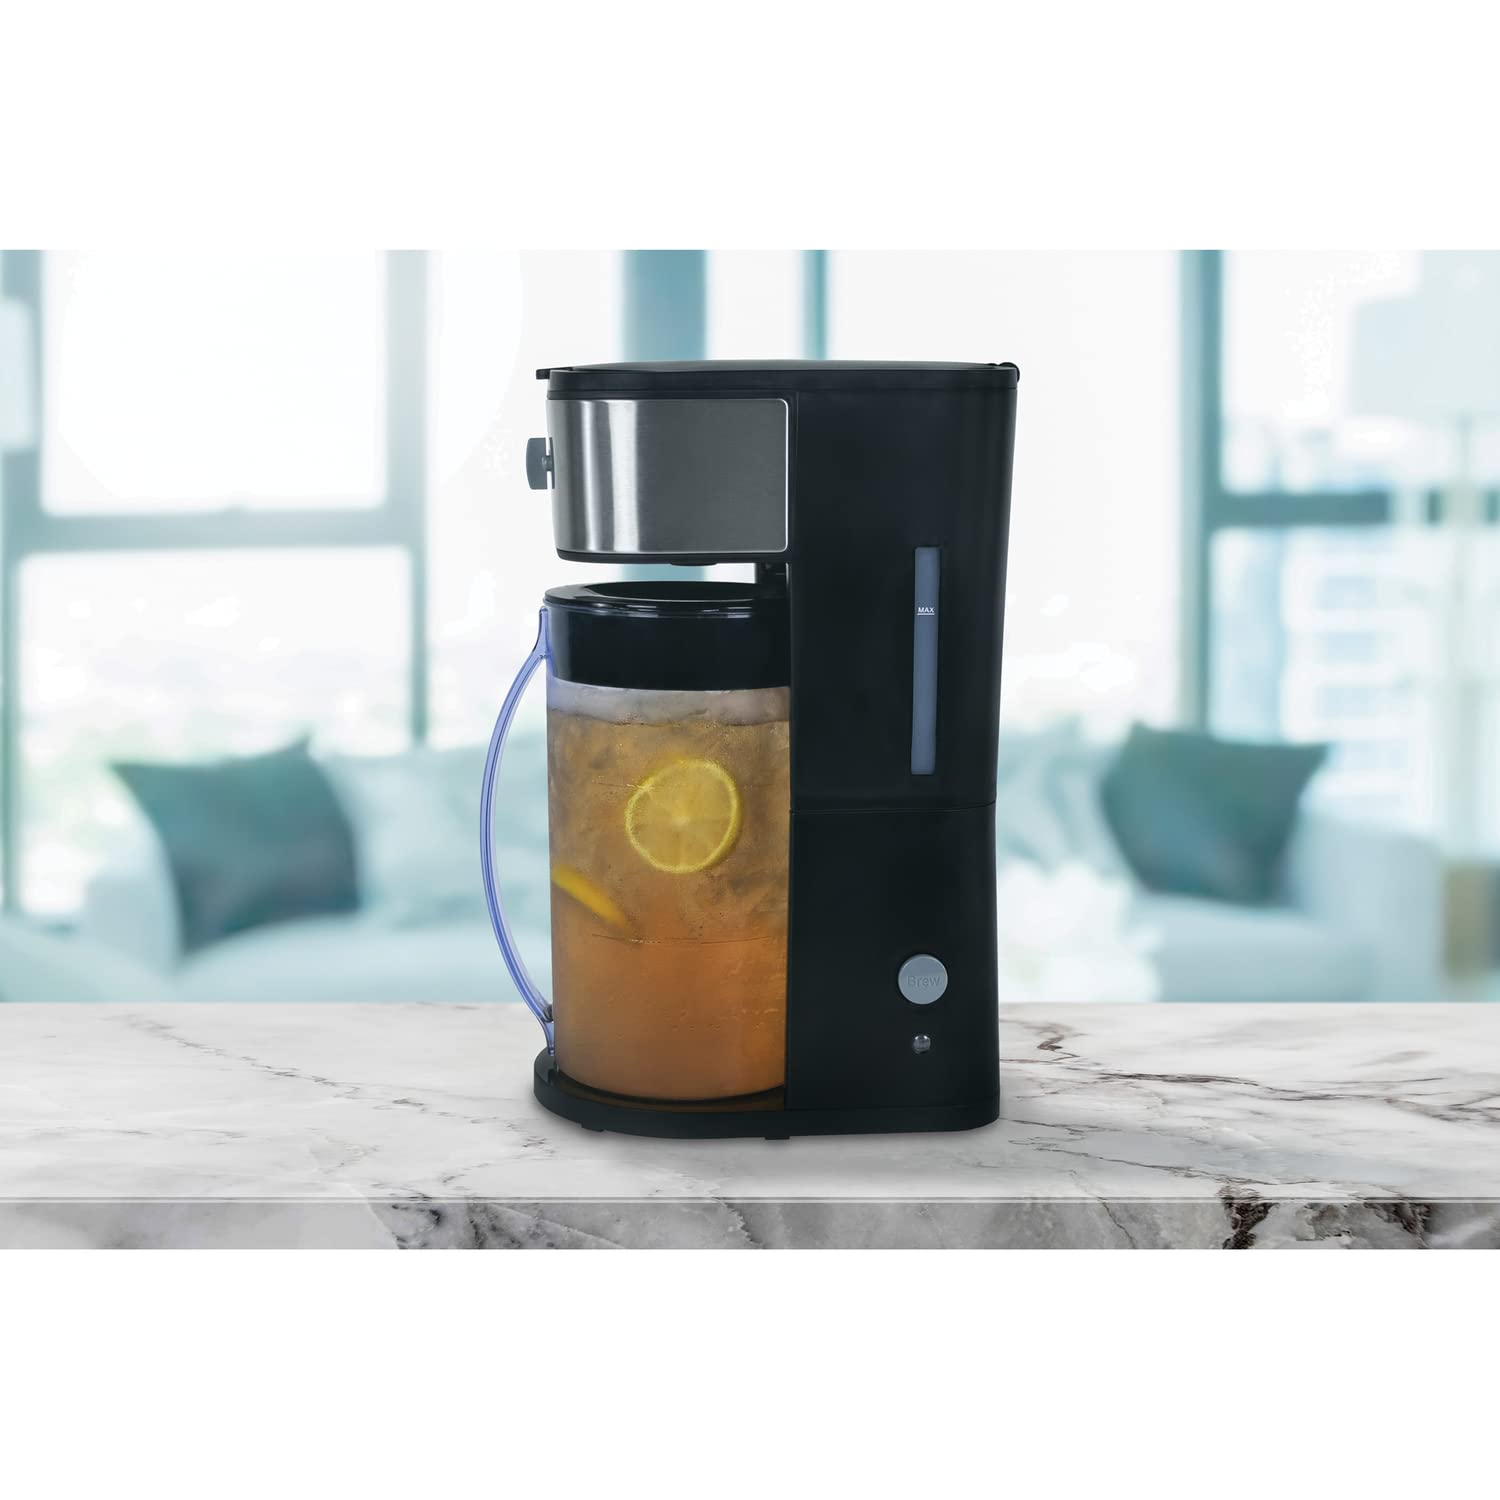 VETTA 10-Cup Iced Tea Maker with Adjustable Strength Selector for Tea and Iced Coffee, Black (VTM-101) (NJE90002)